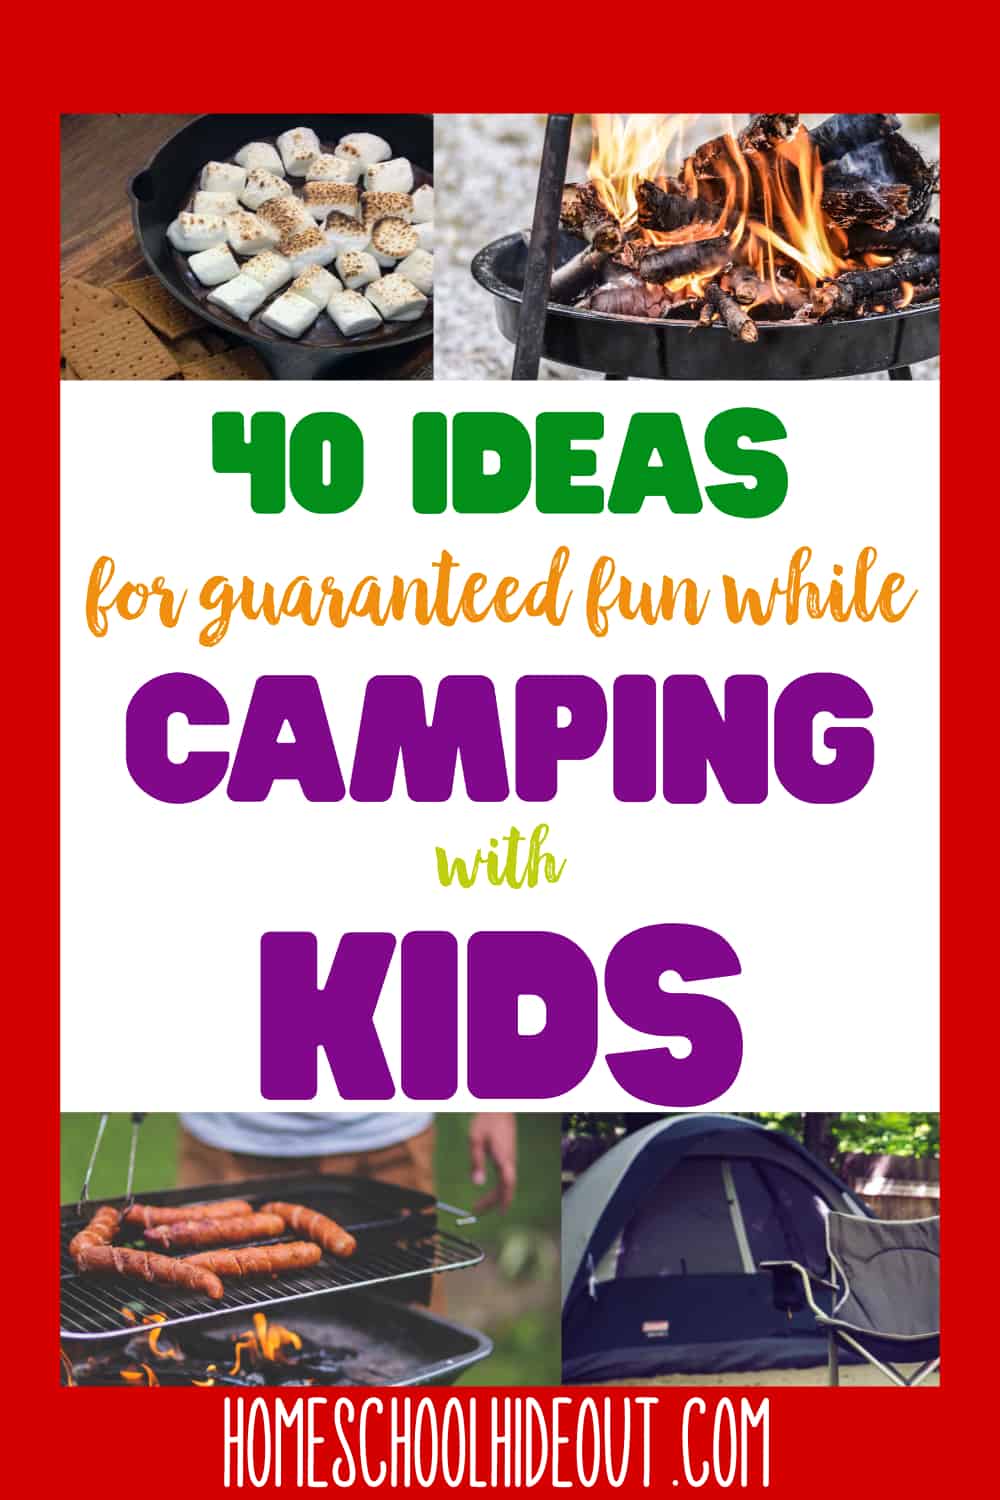 Going camping with kids is so much easier with these handy tricks! I would've never thought of these things! #camping #familytime #vacation